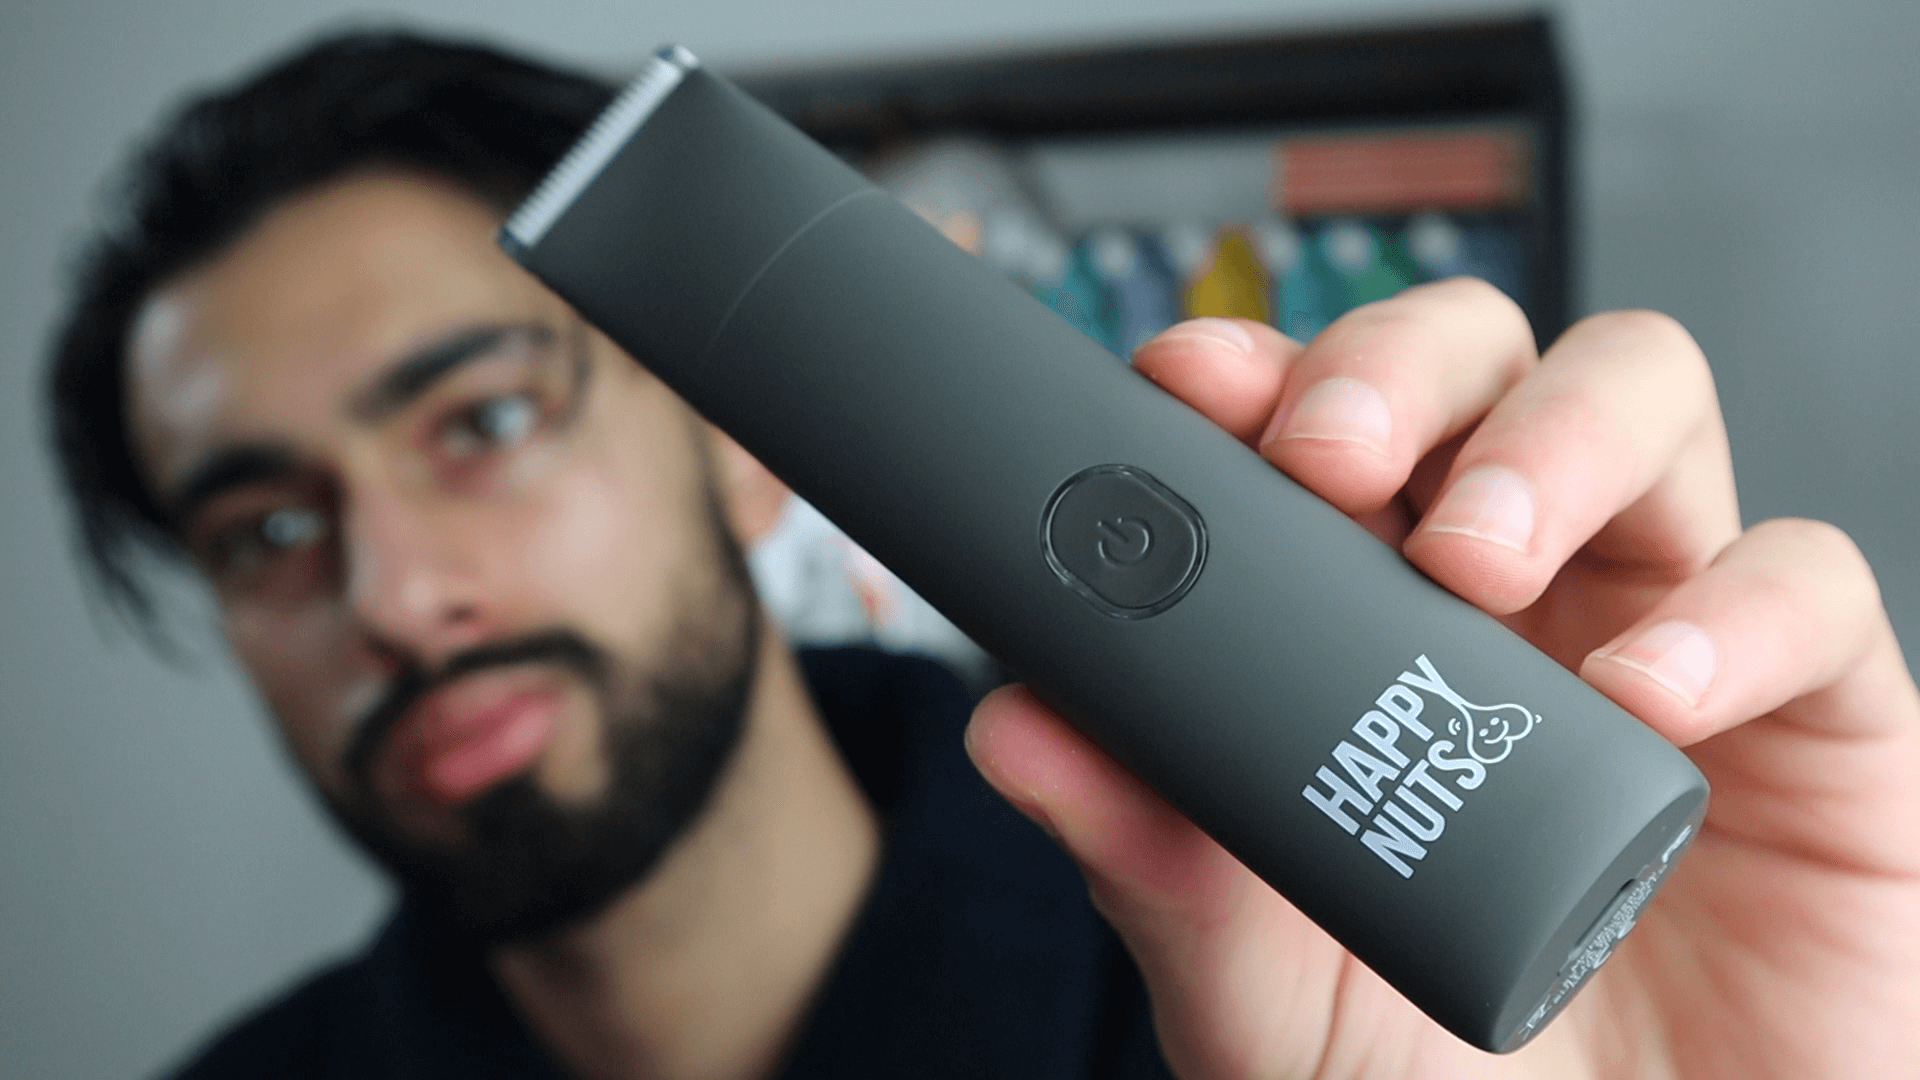 Happy Nuts The Lumberjack (Honest Review) | Best Budget Trimmer For Men